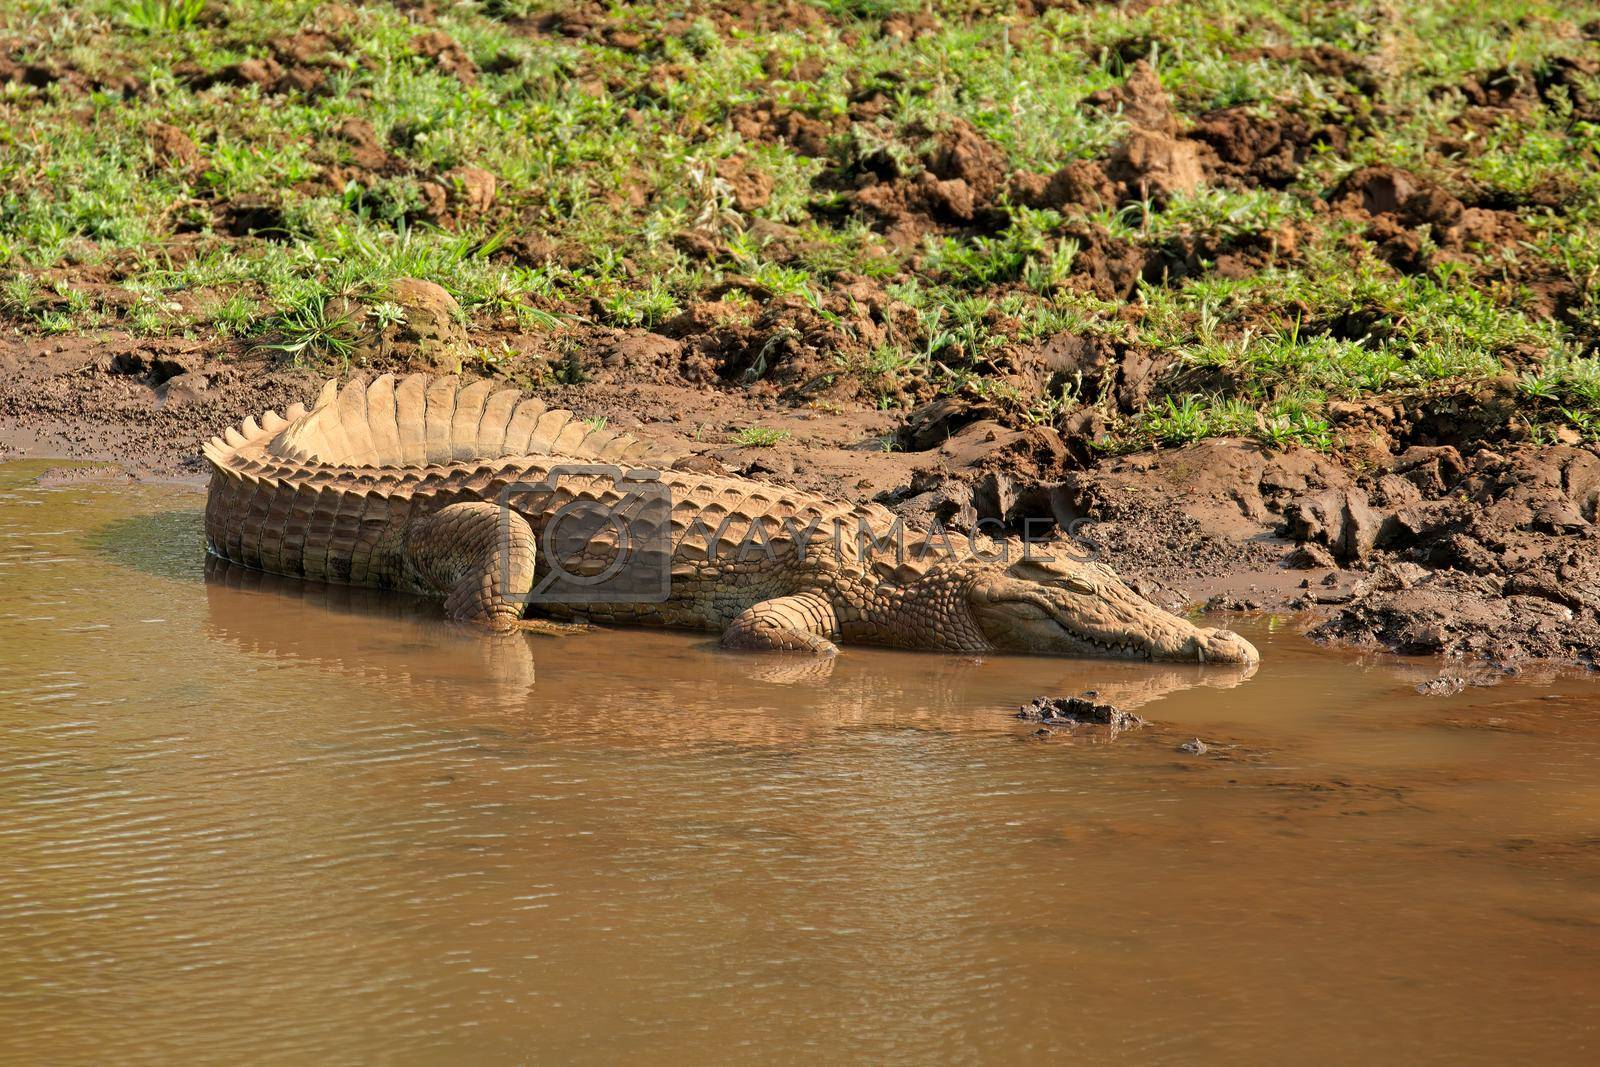 Royalty free image of Nile crocodile basking in shallow water by EcoPic